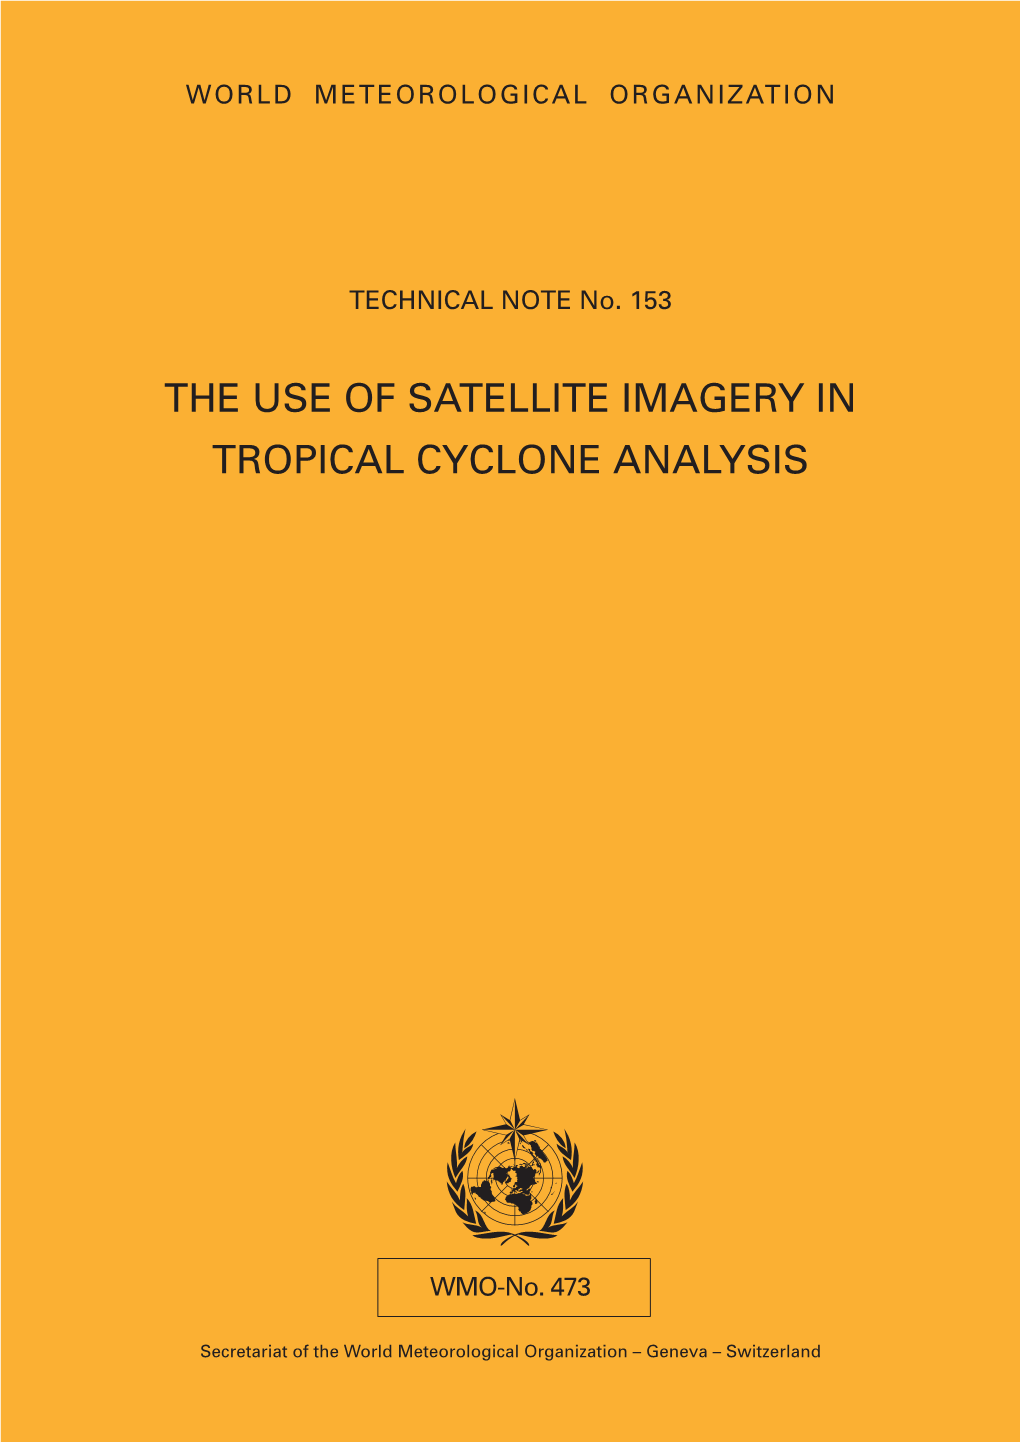 The Use of Satellite Imagery in Tropical Cyclone Analysis